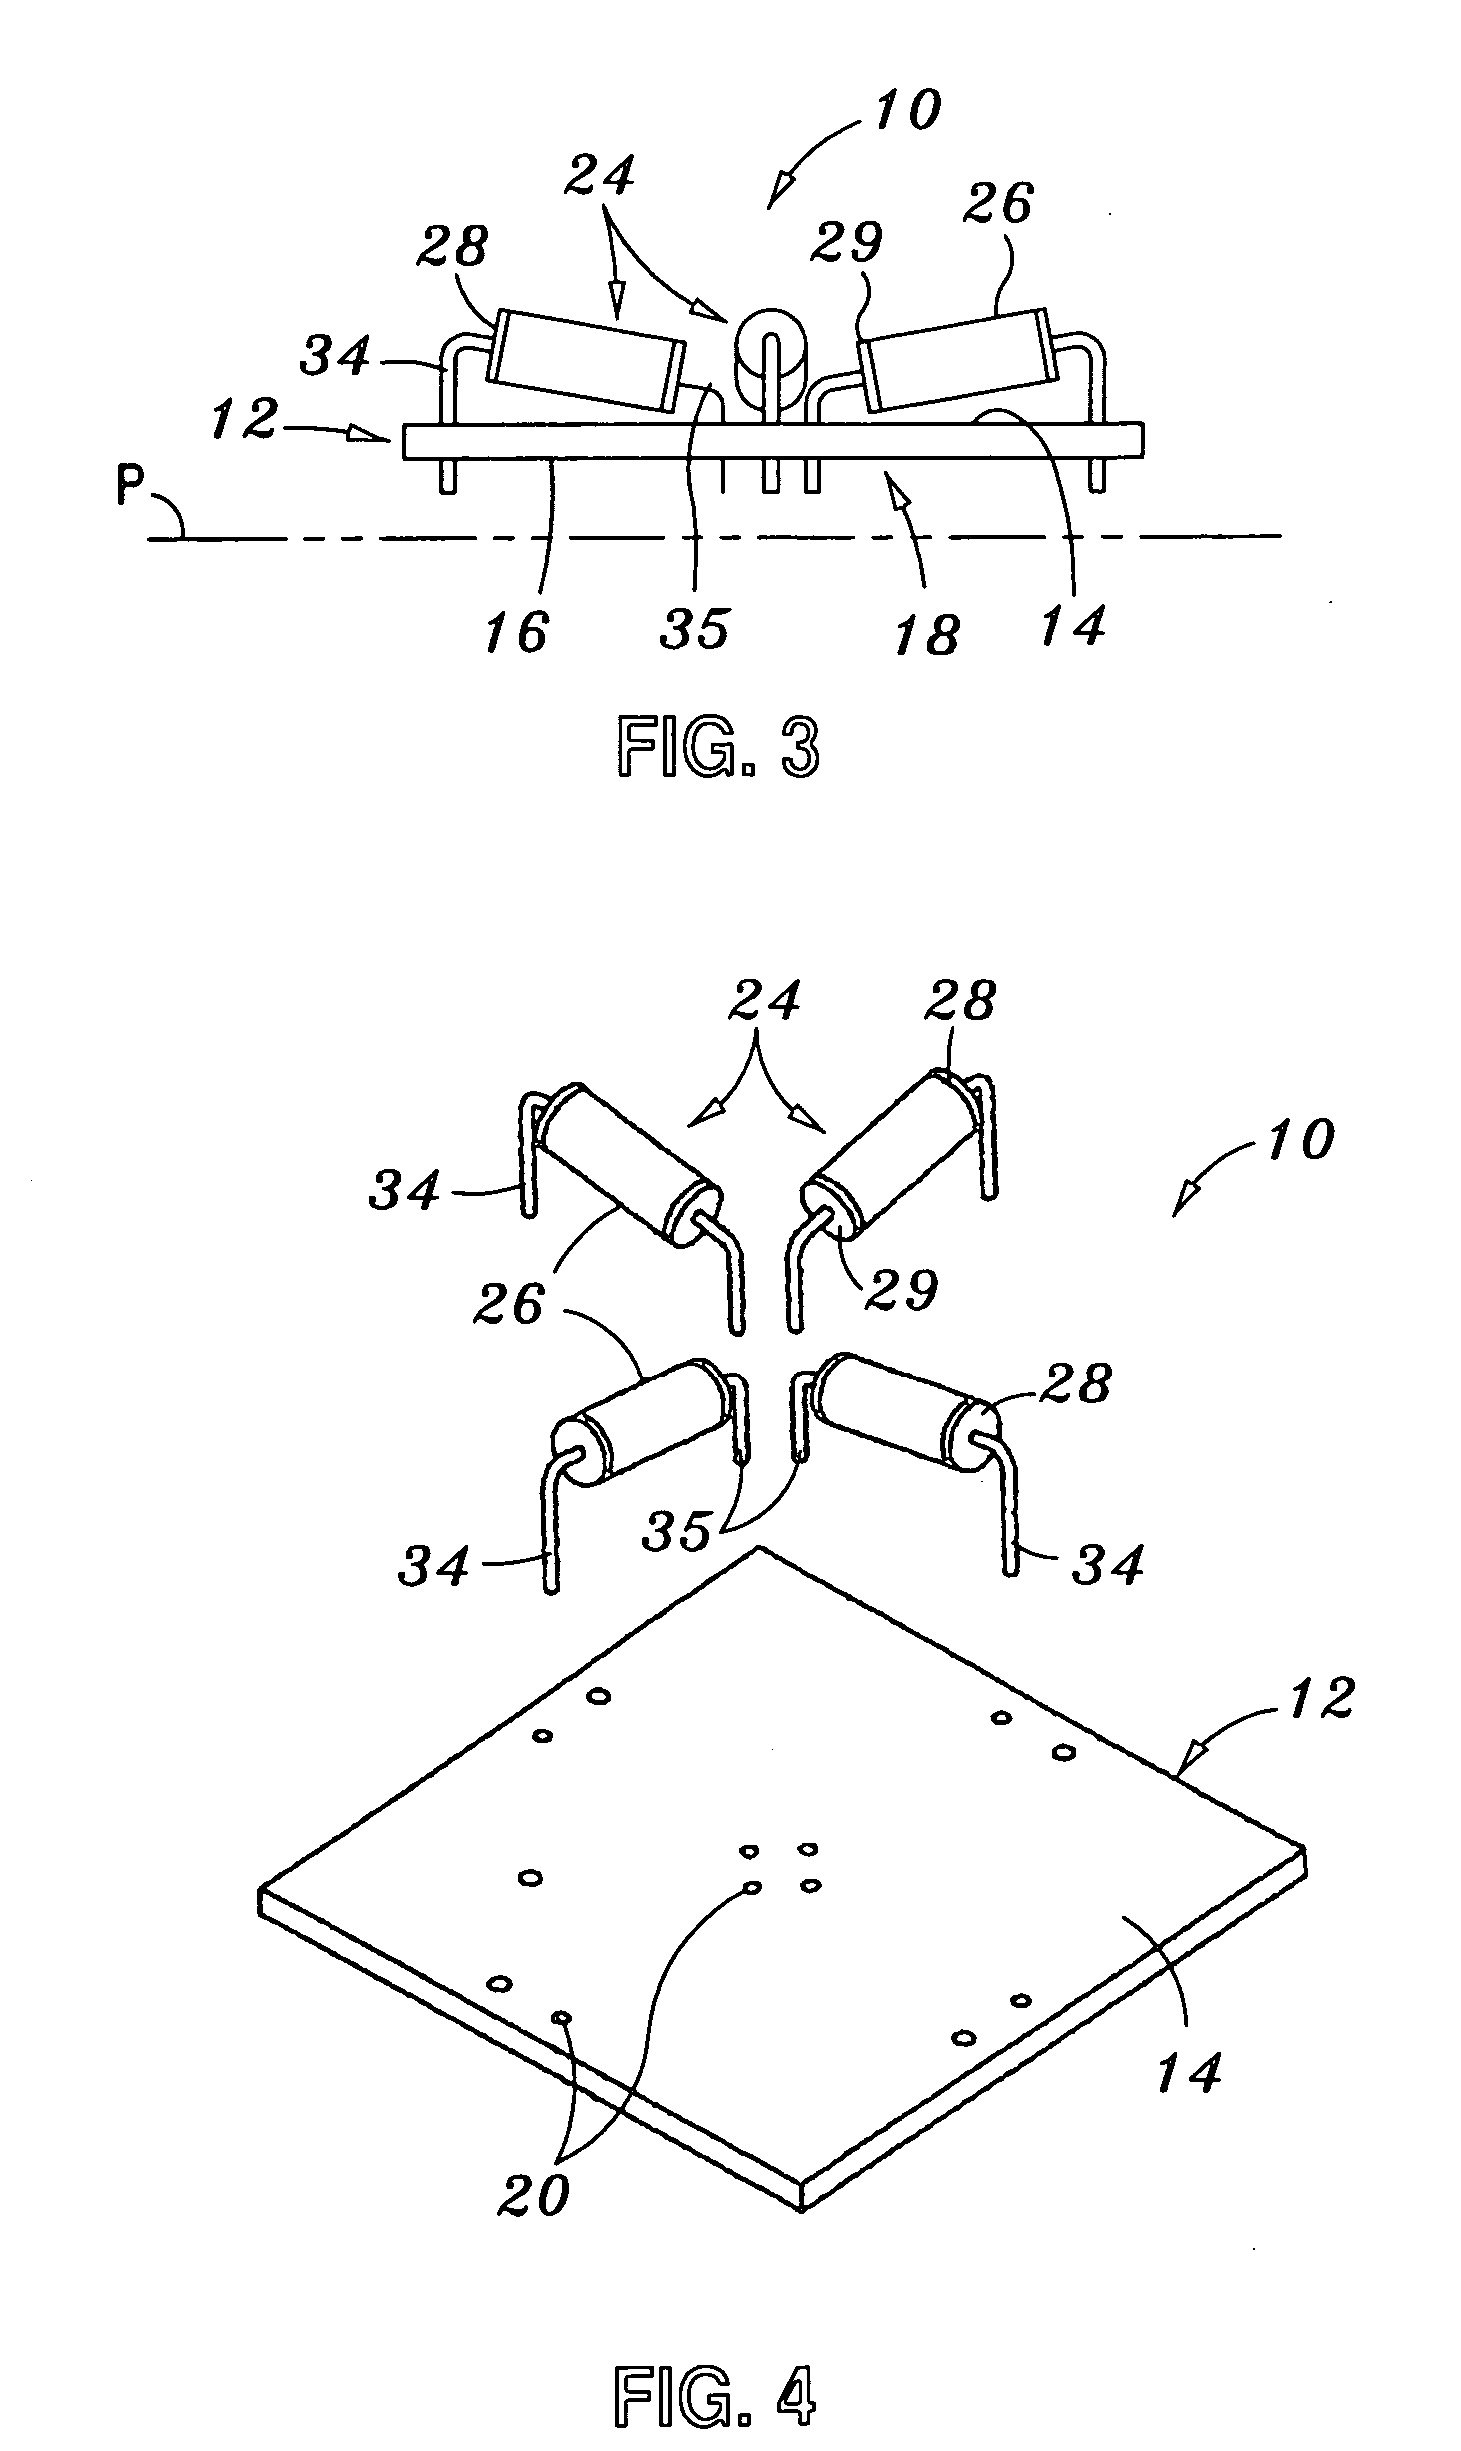 Level/position sensor and related electronic circuitry for interactive toy